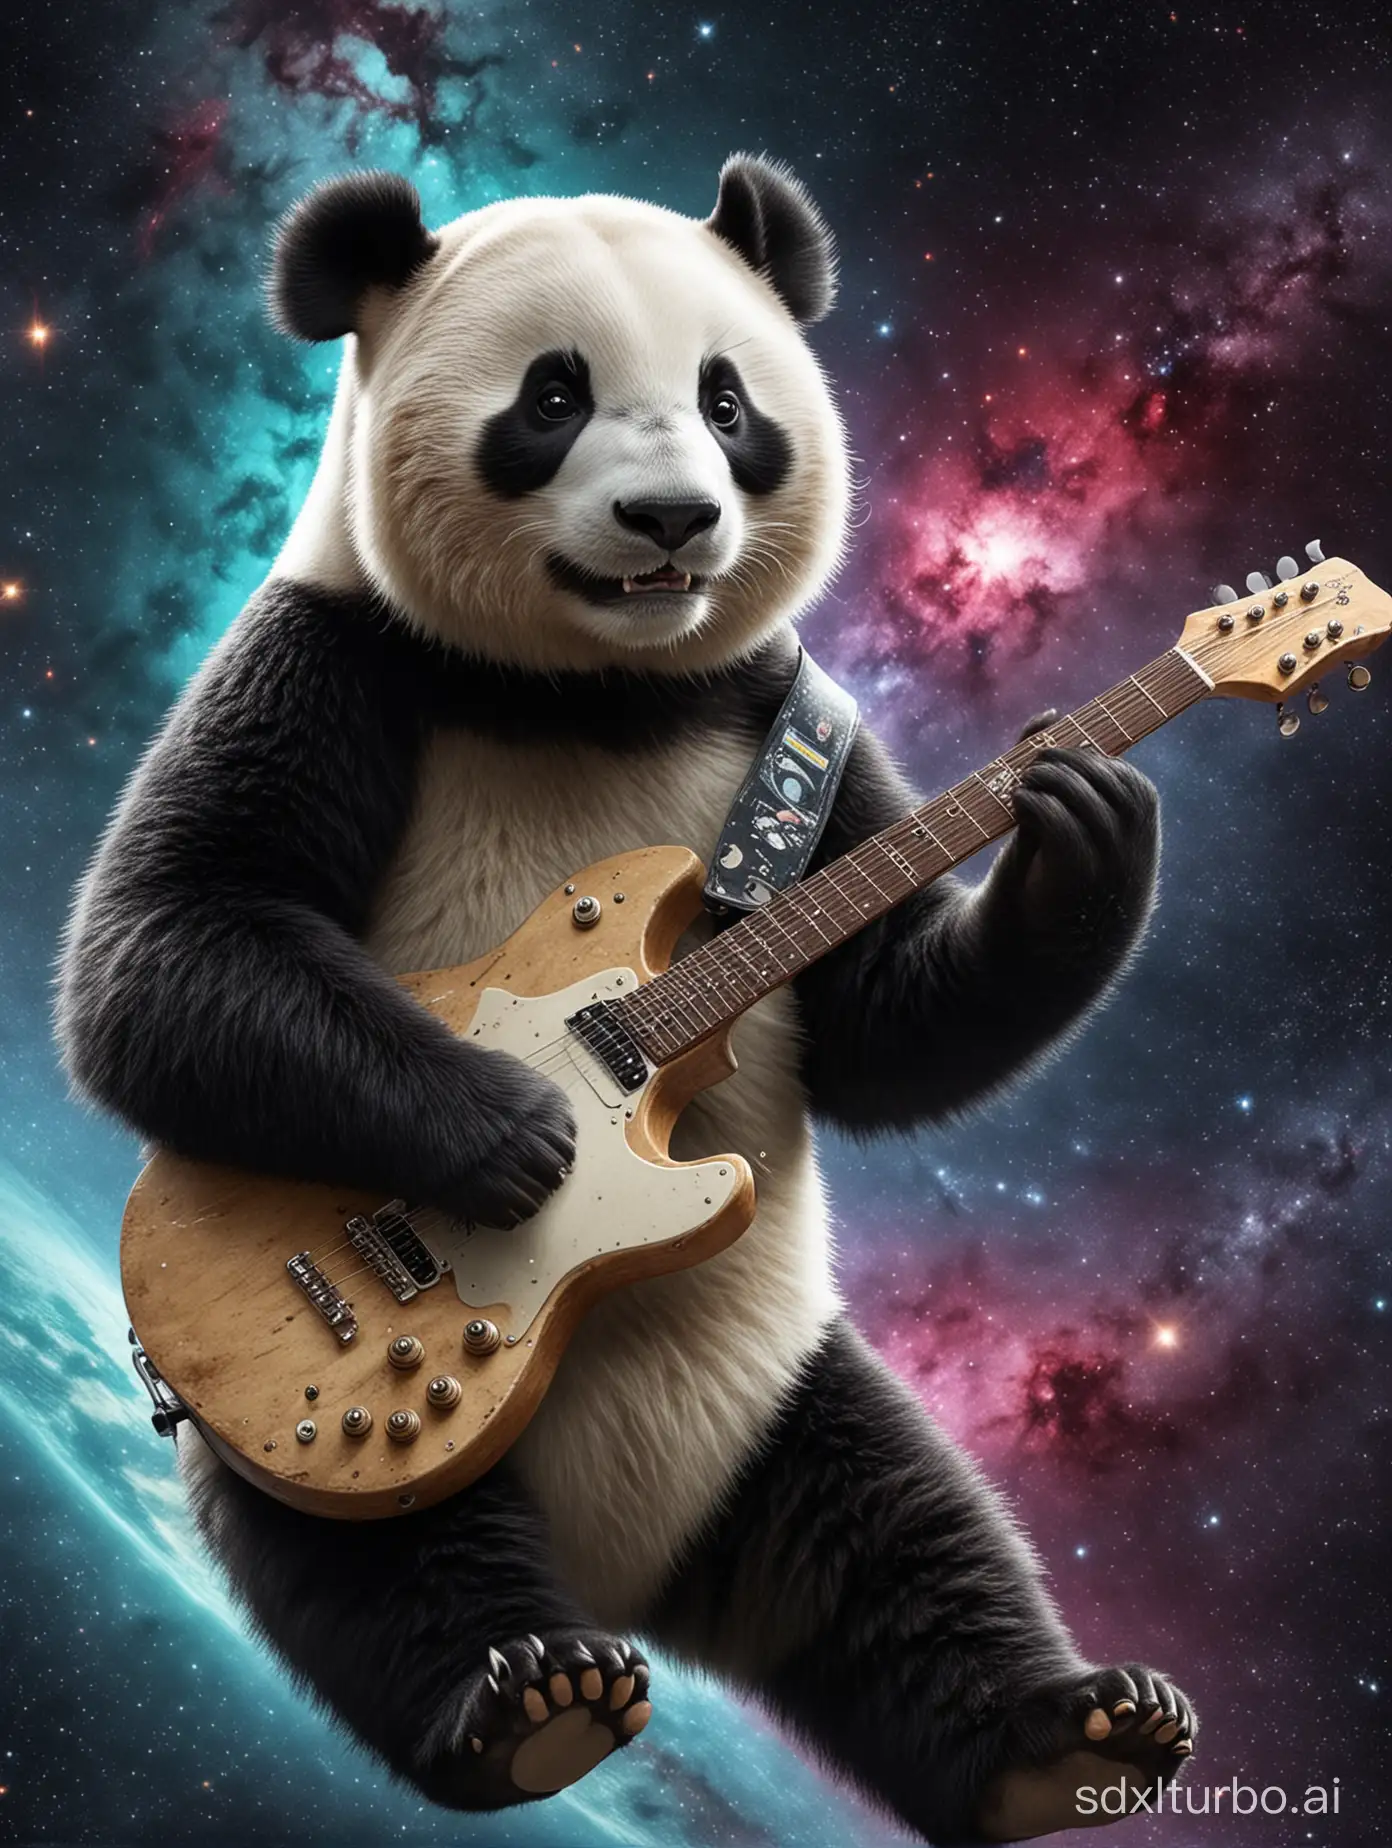 The panda playing guitar in space